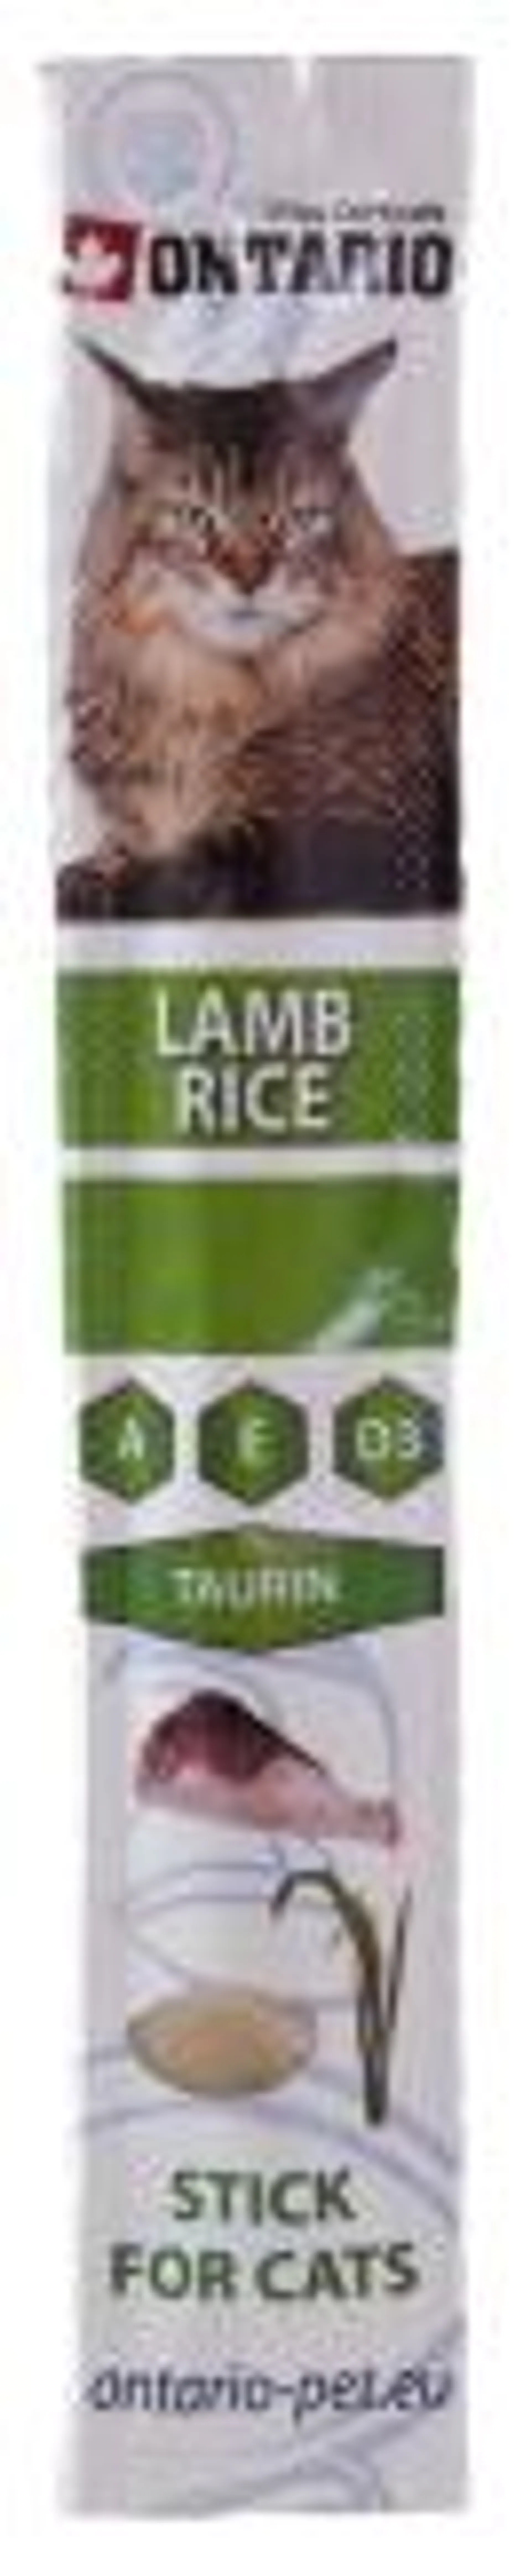 ONTARIO Stick for cats Lamb Rice 5g